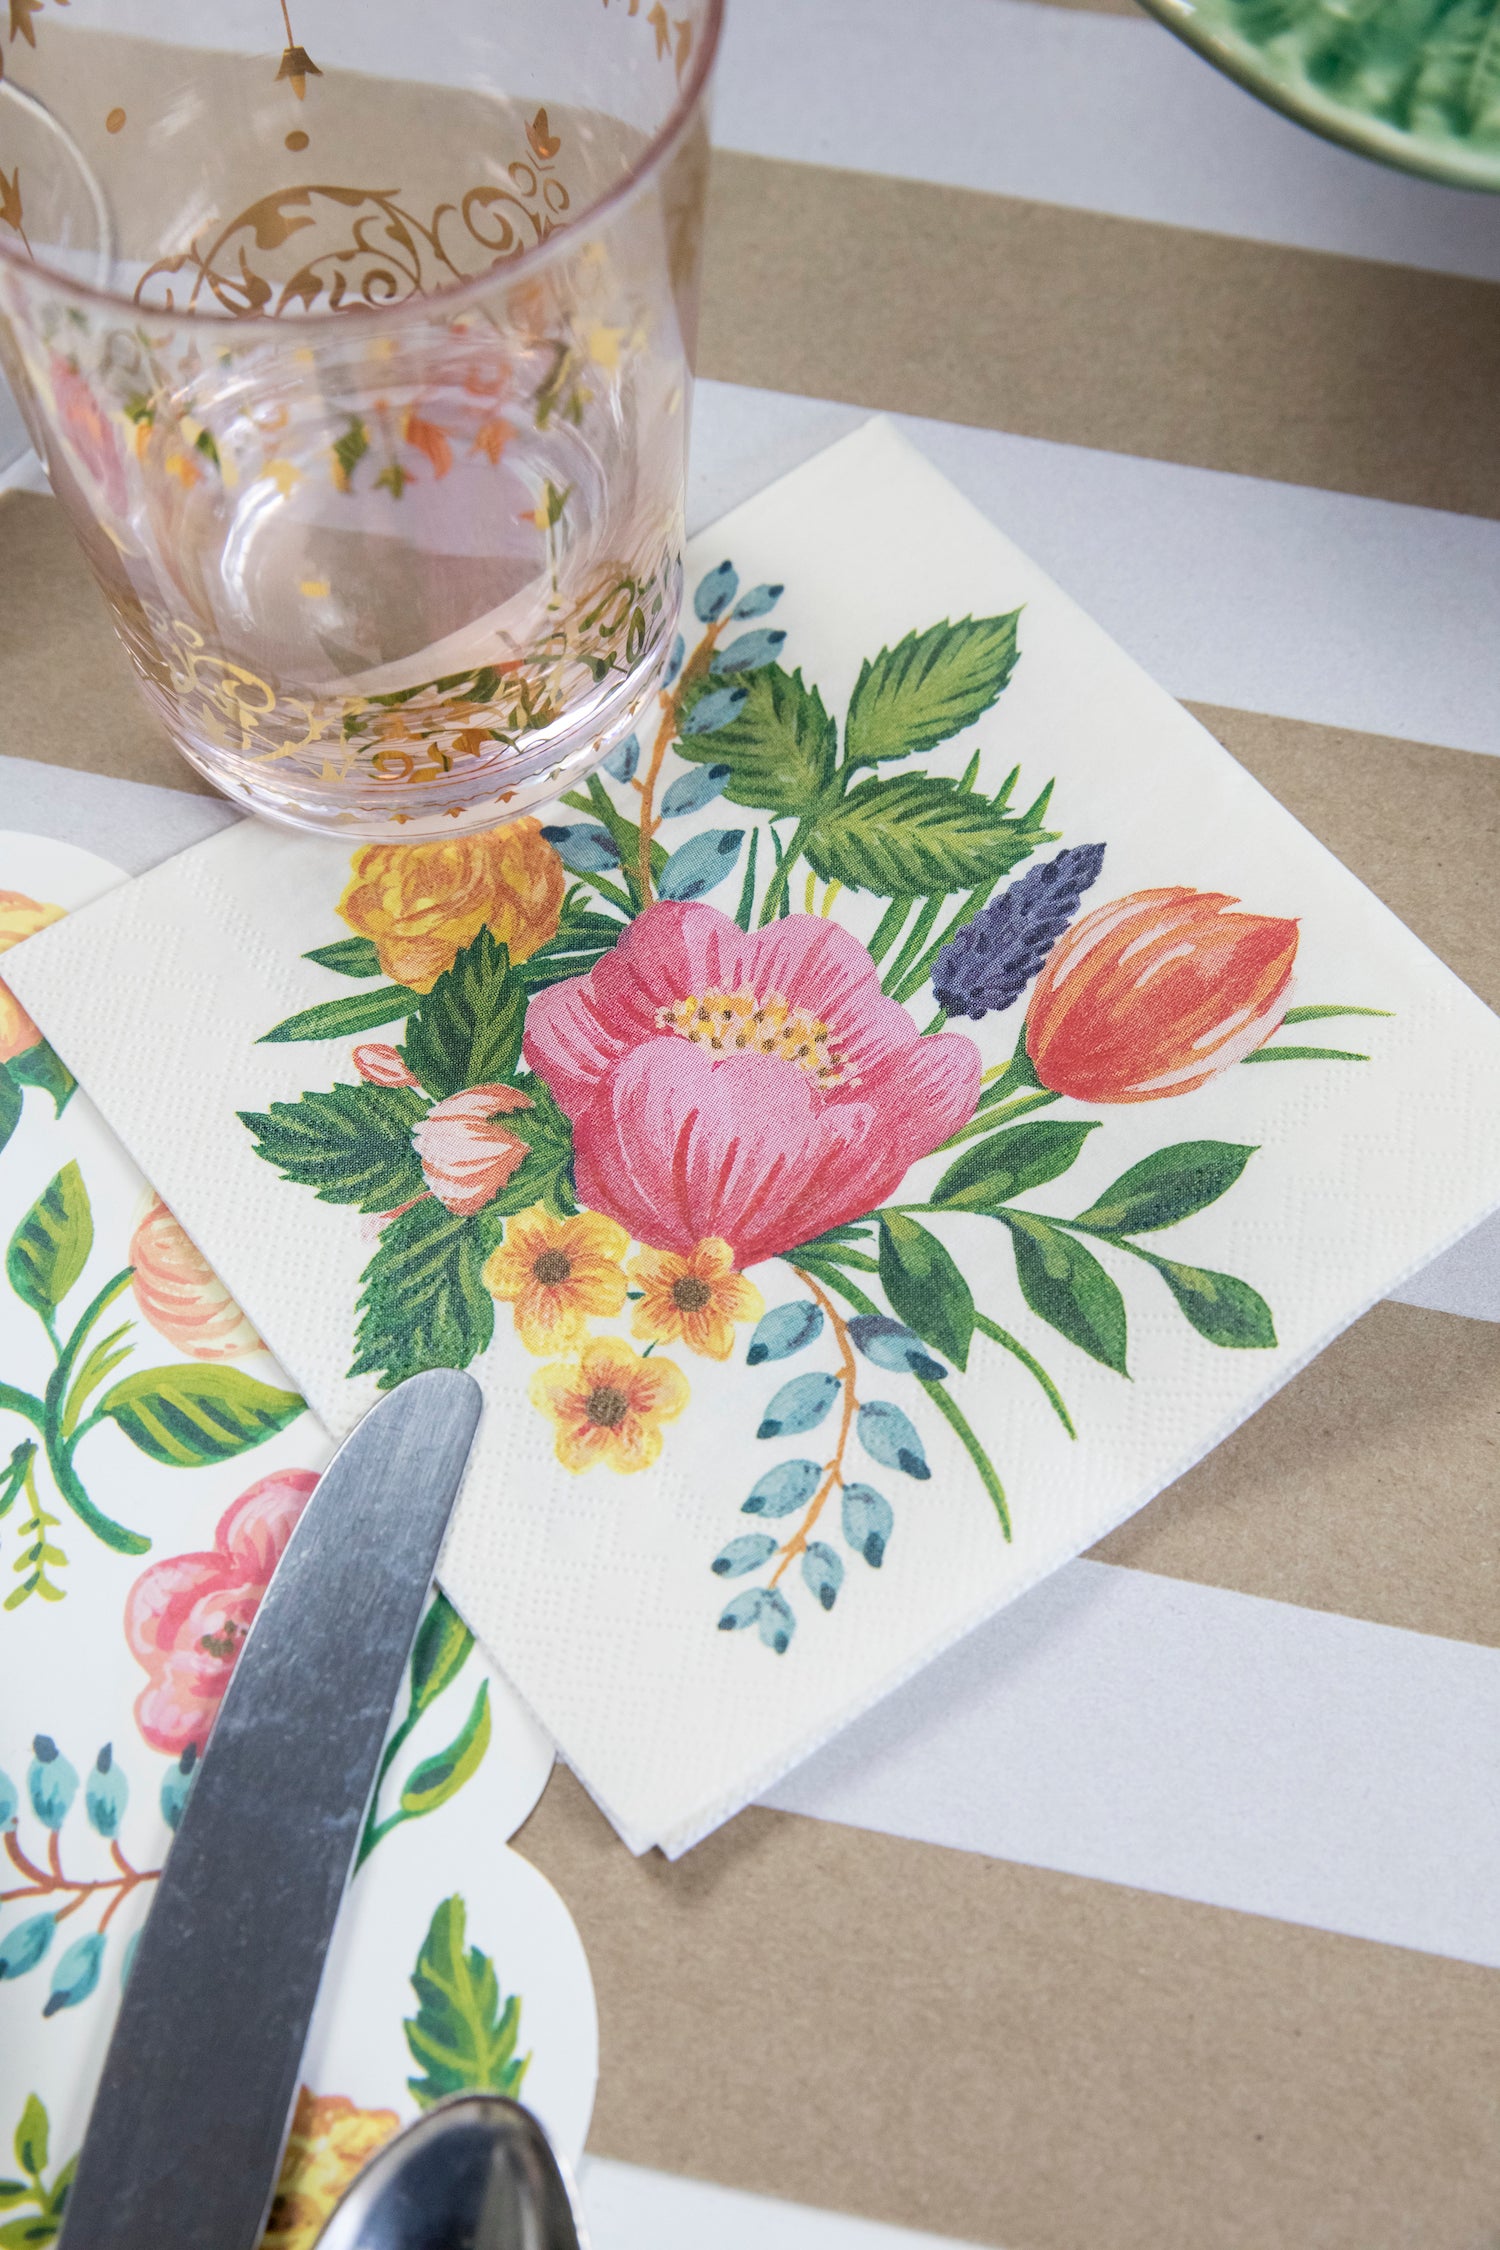 A Sweet Garden Cocktail Napkin under a glass of water in a floral place setting.